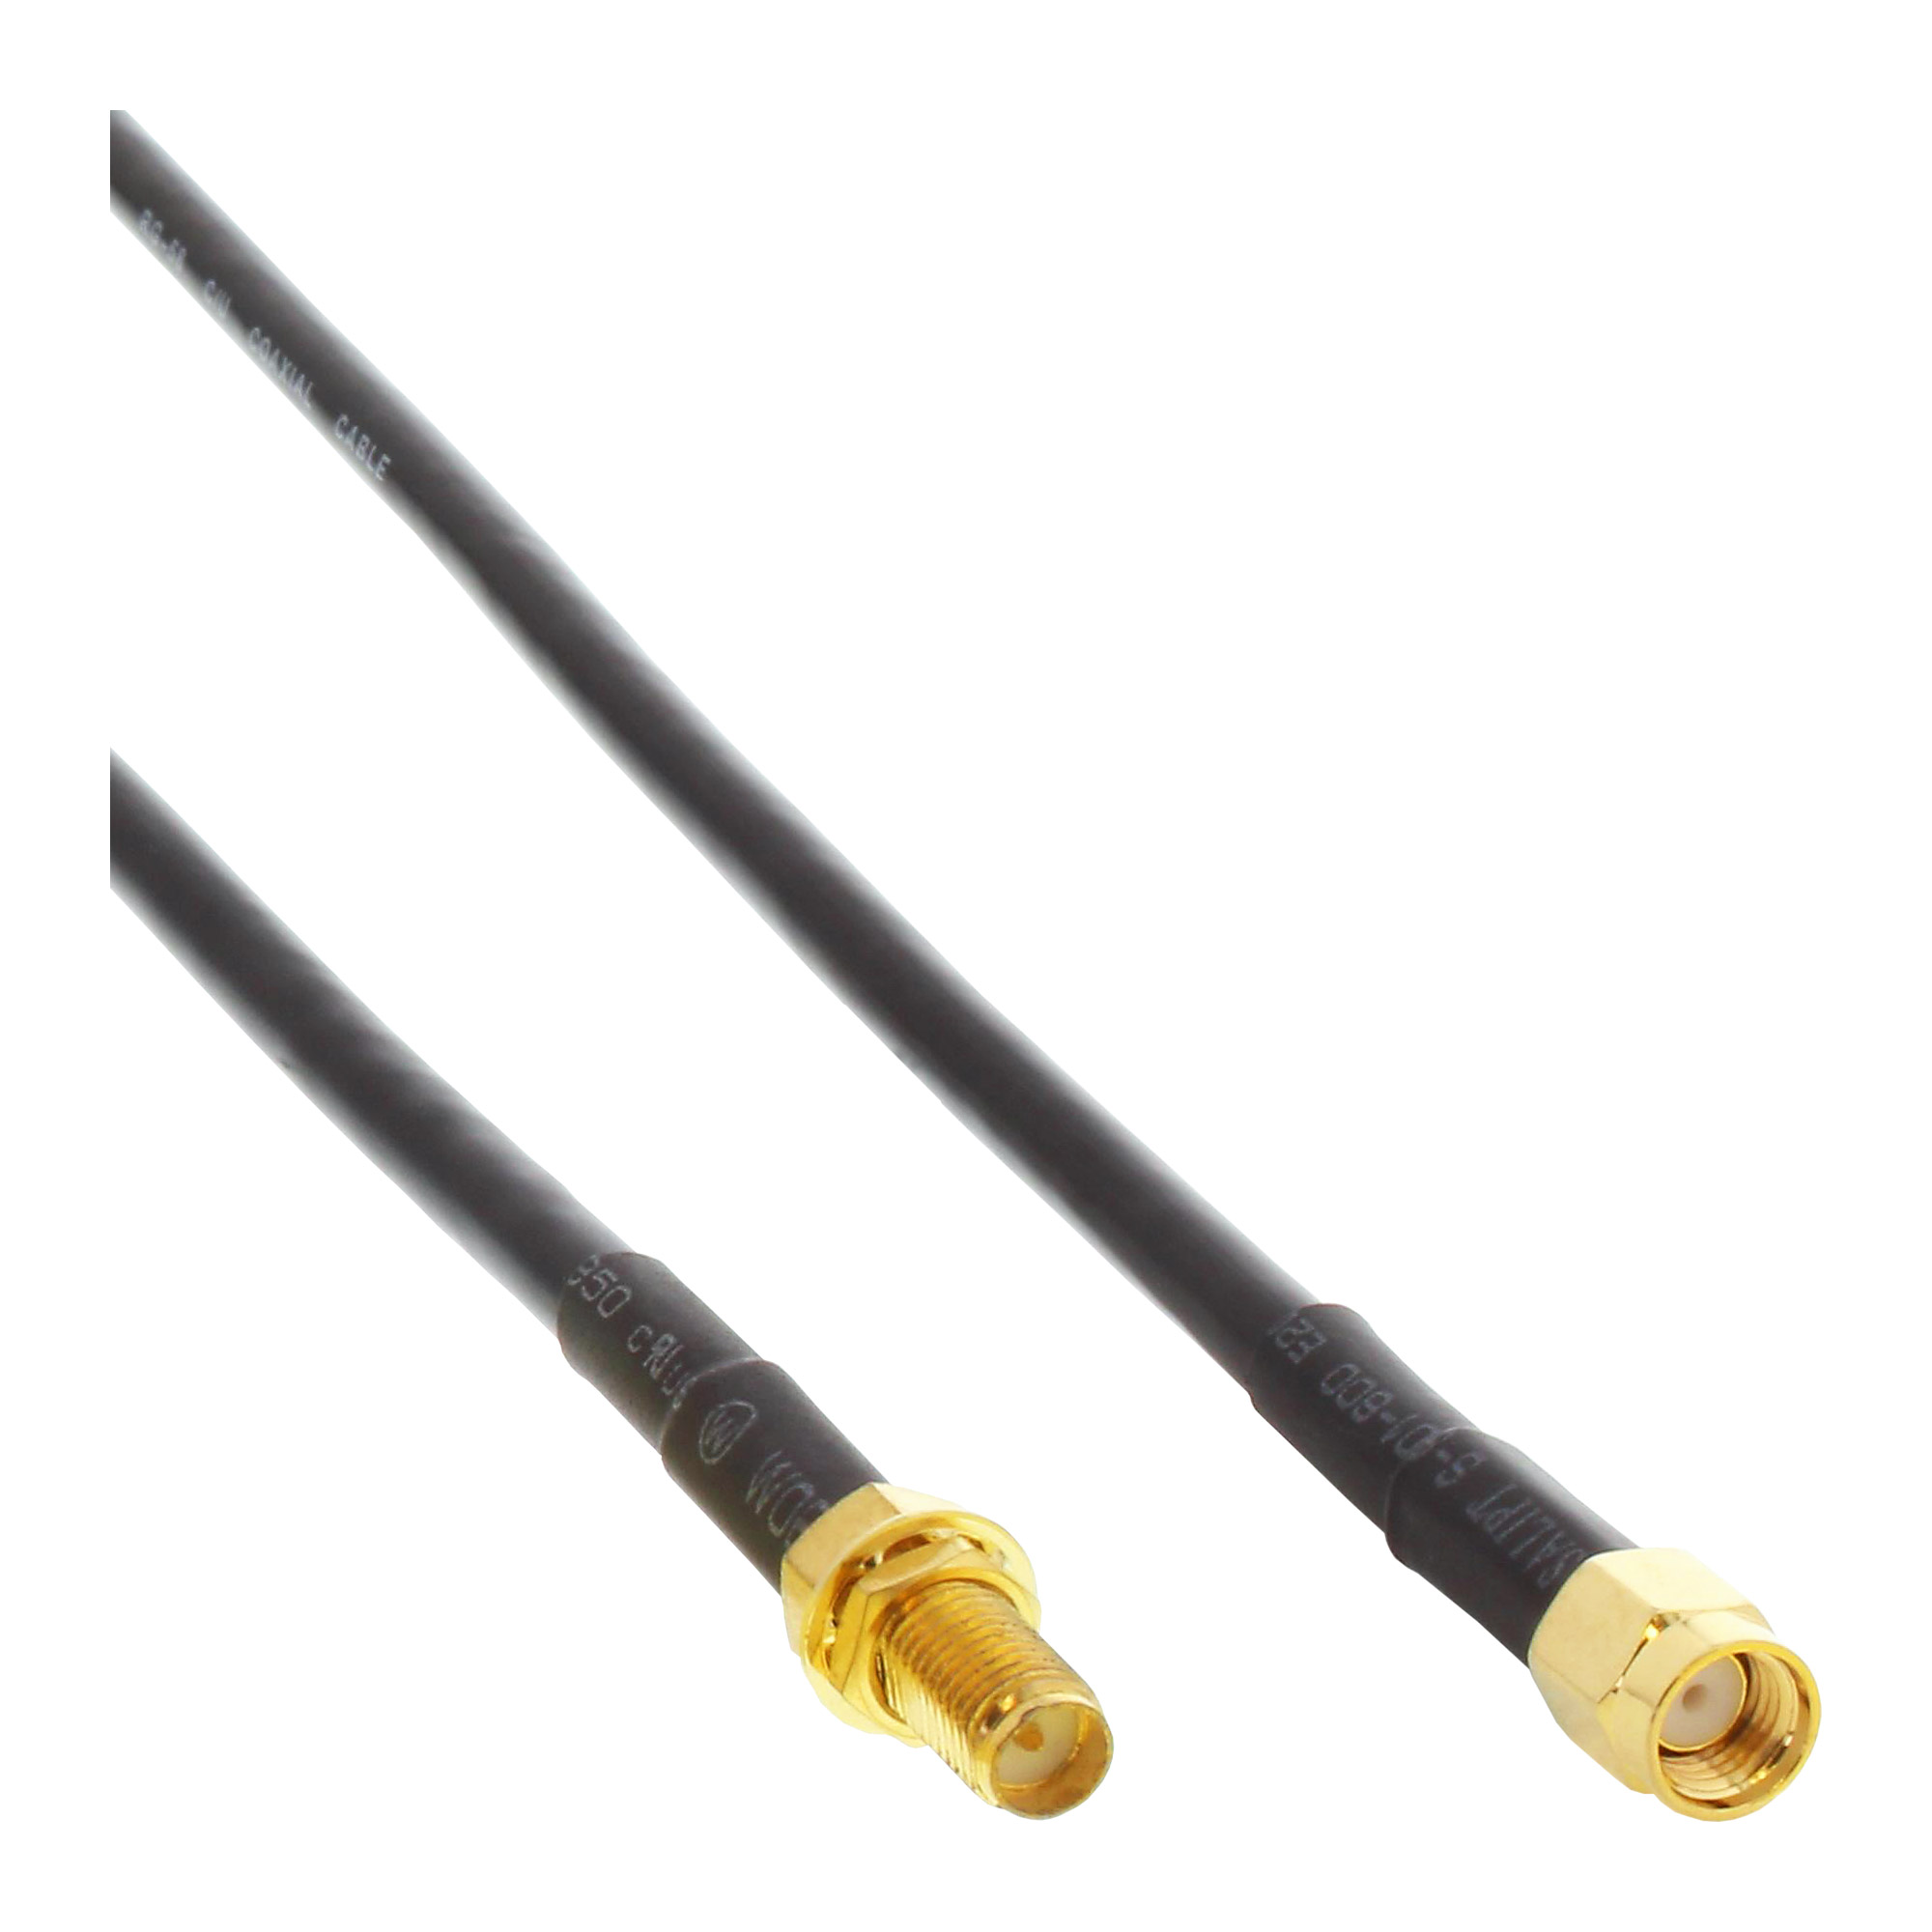 WLAN antenna cable, 0.3 m (f/m)